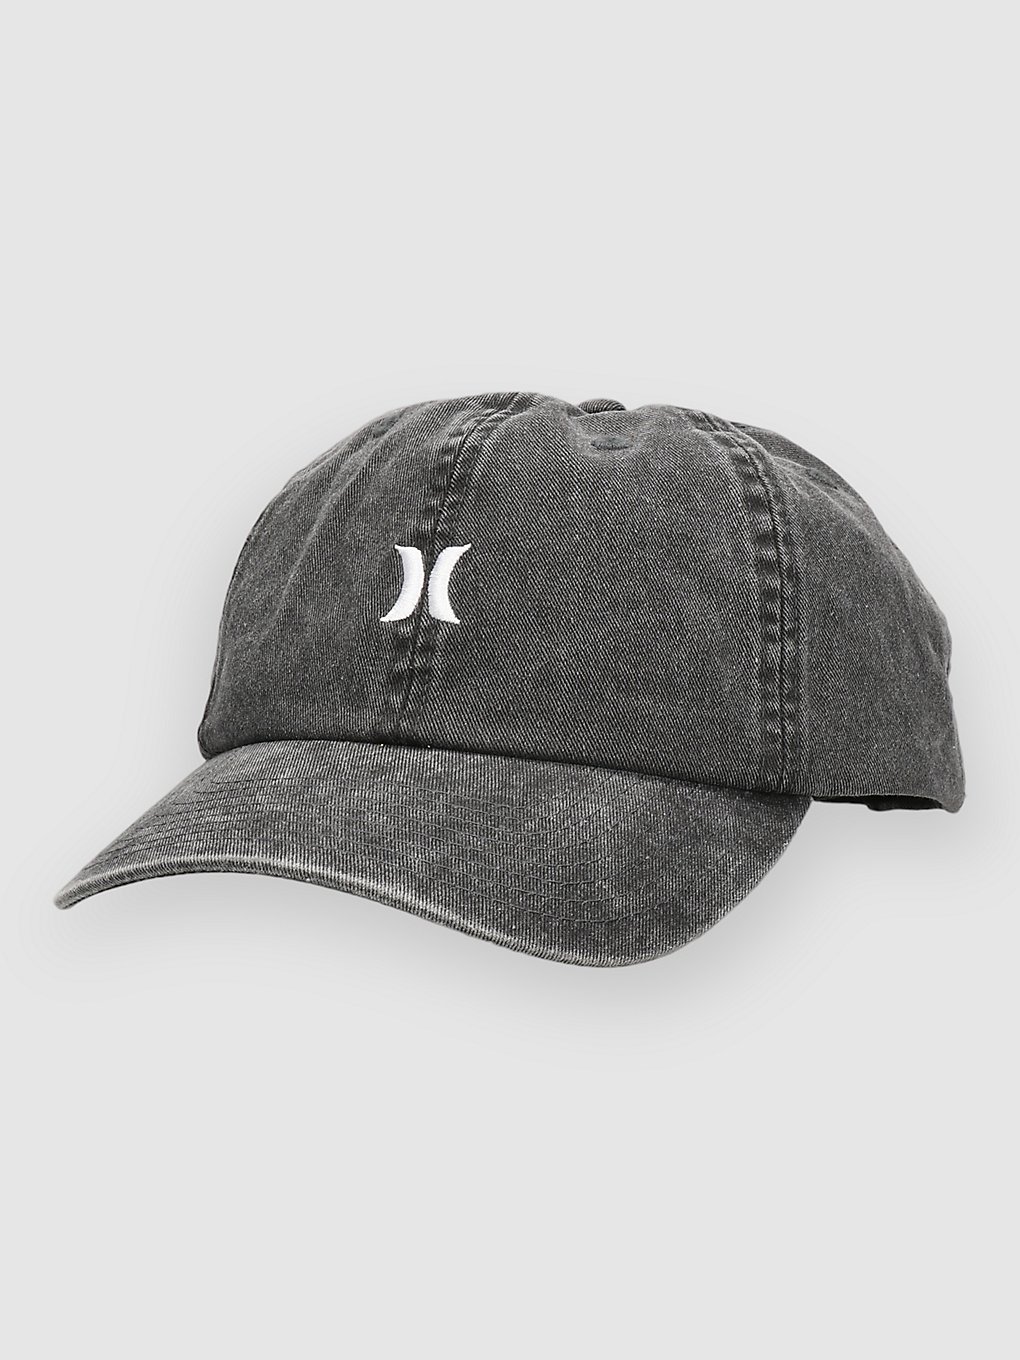 Hurley Mom Iconic Casquette gris